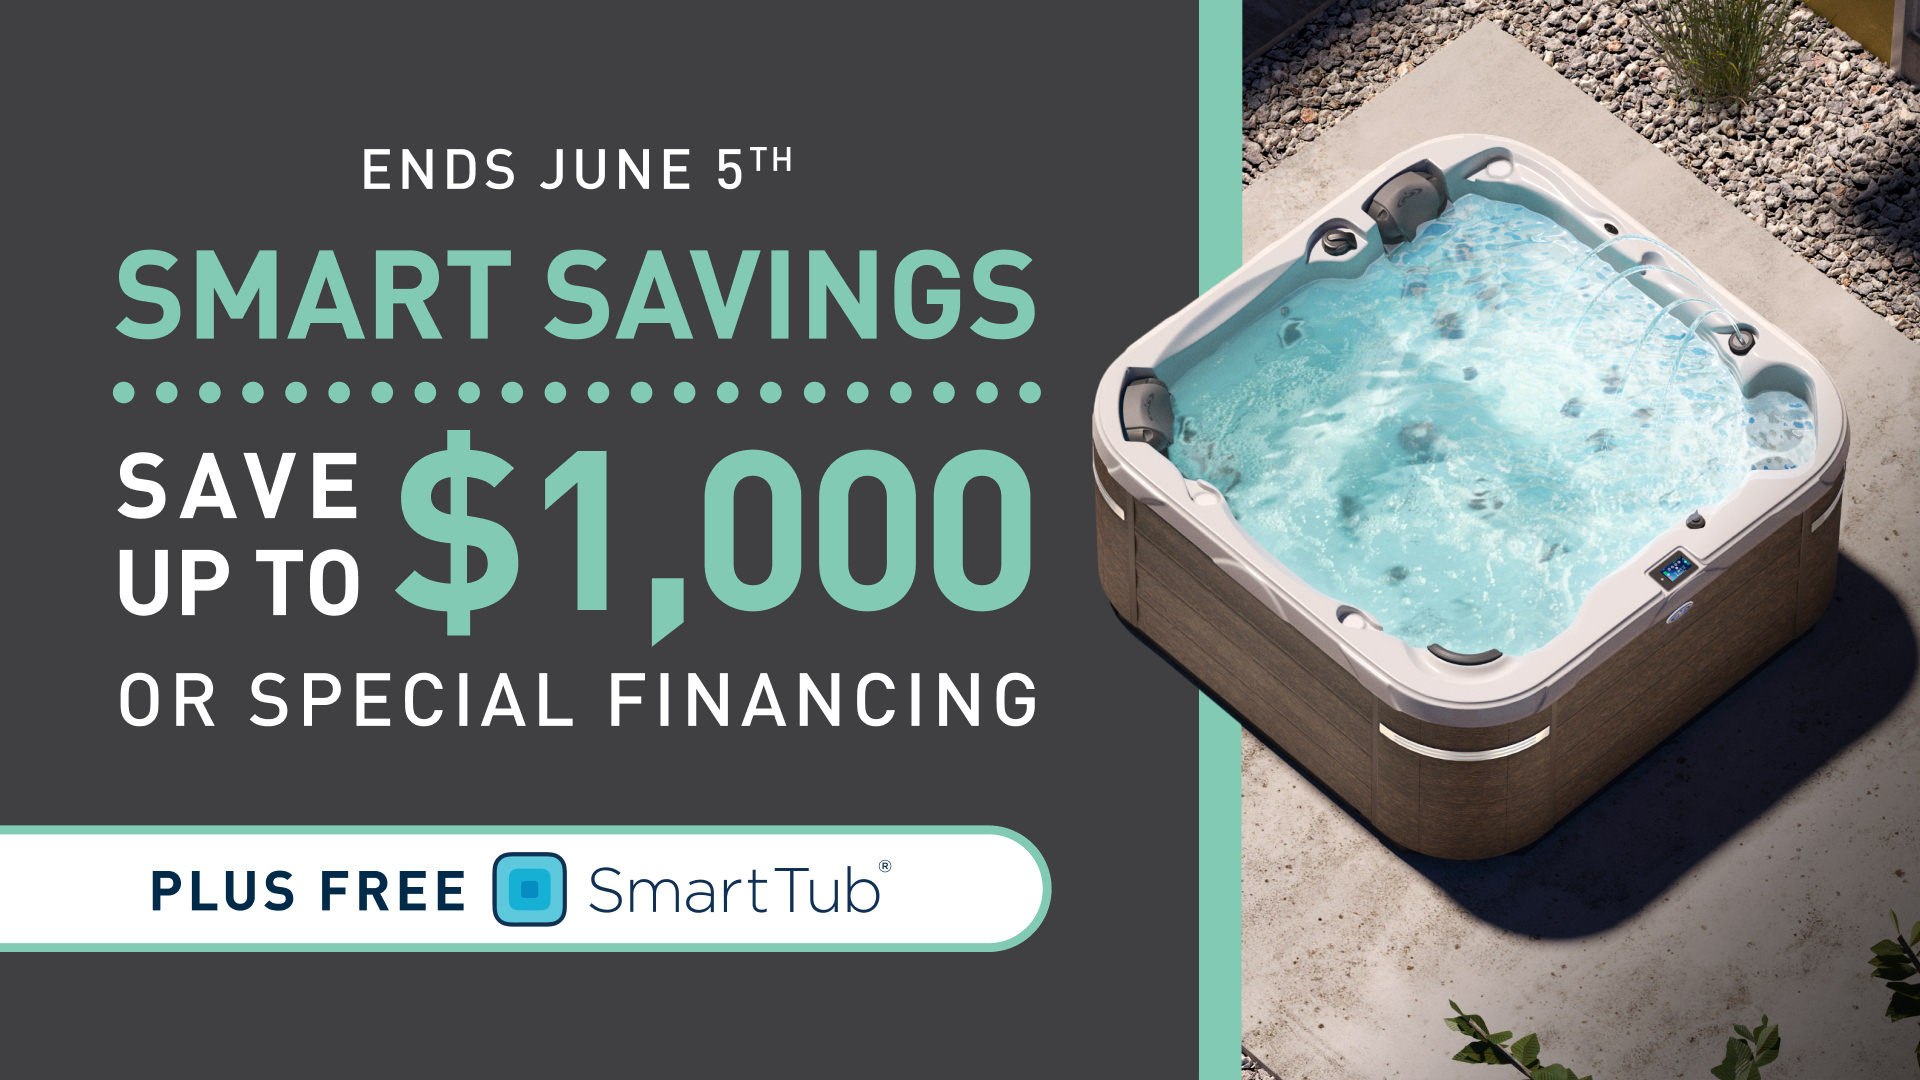 Save up to $1000 or Special Financing, plus free SmartTub!